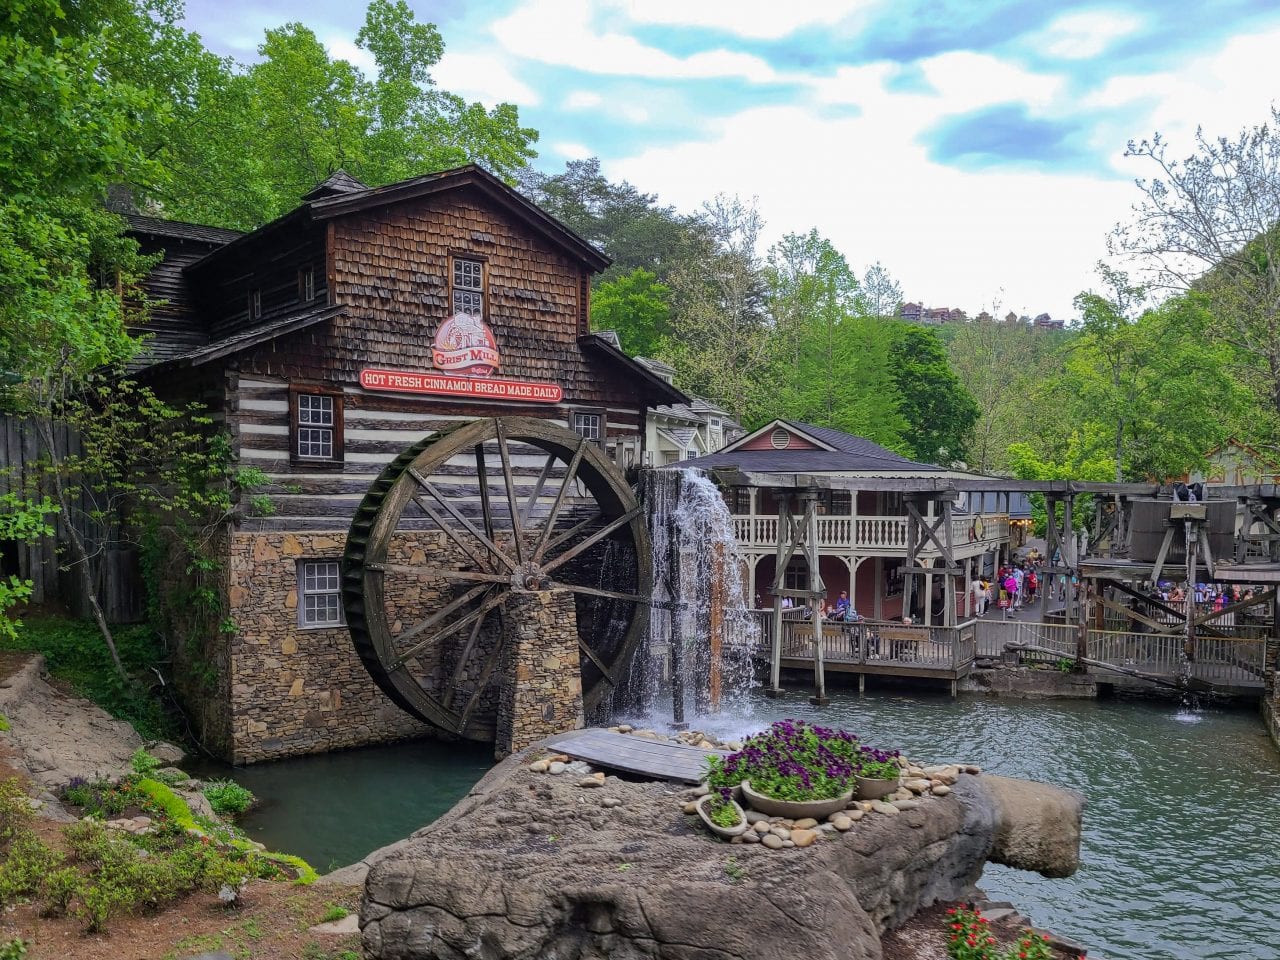 The Grist Mill at Dollywood